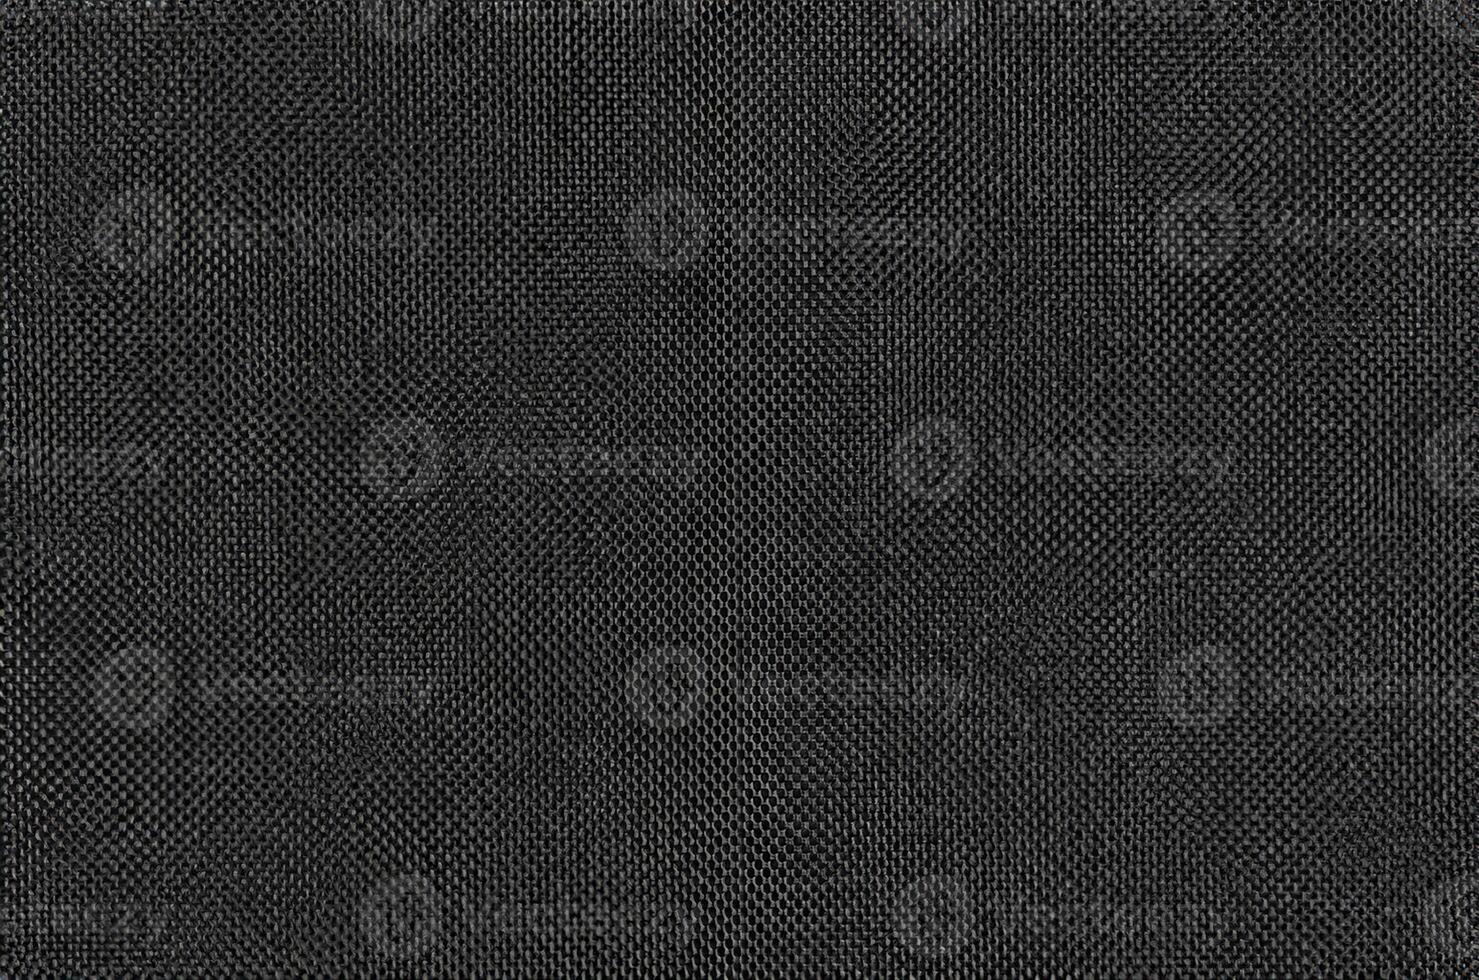 Seamless Black and Grey Fabric Texture Background for Design Artwork photo